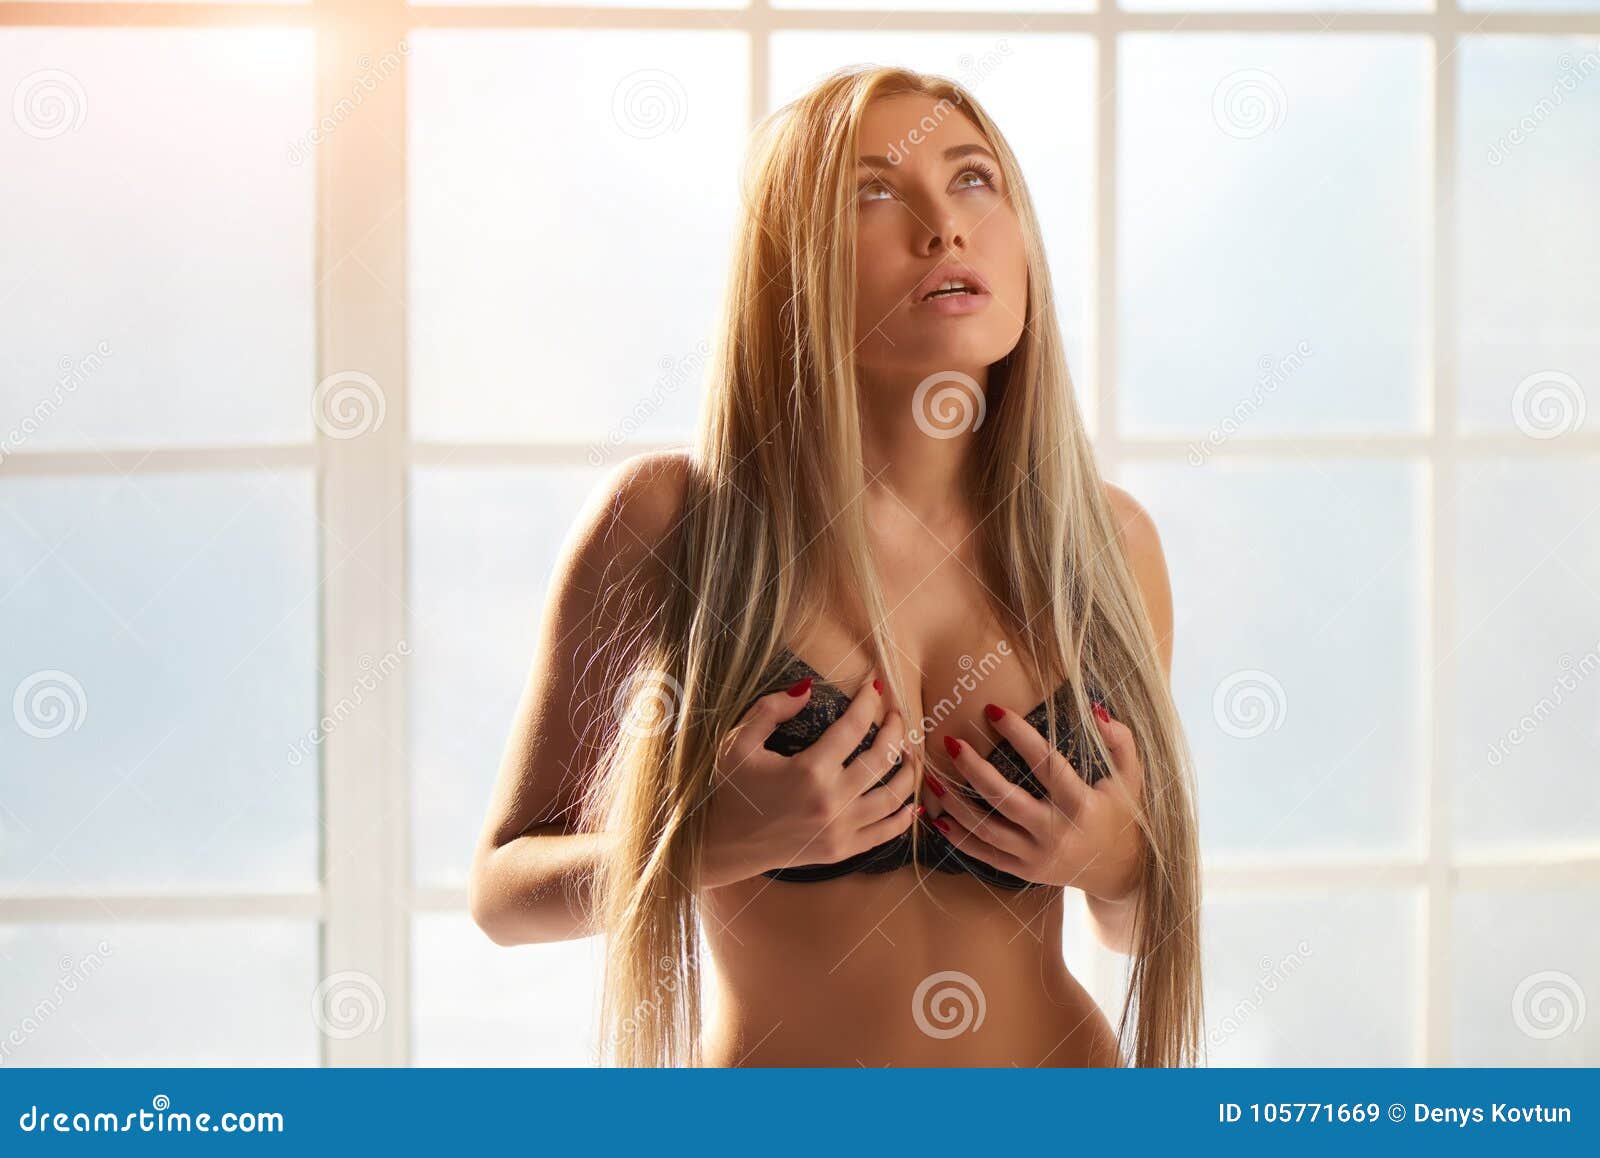 Sensual Girl Touching Her Breasts pic